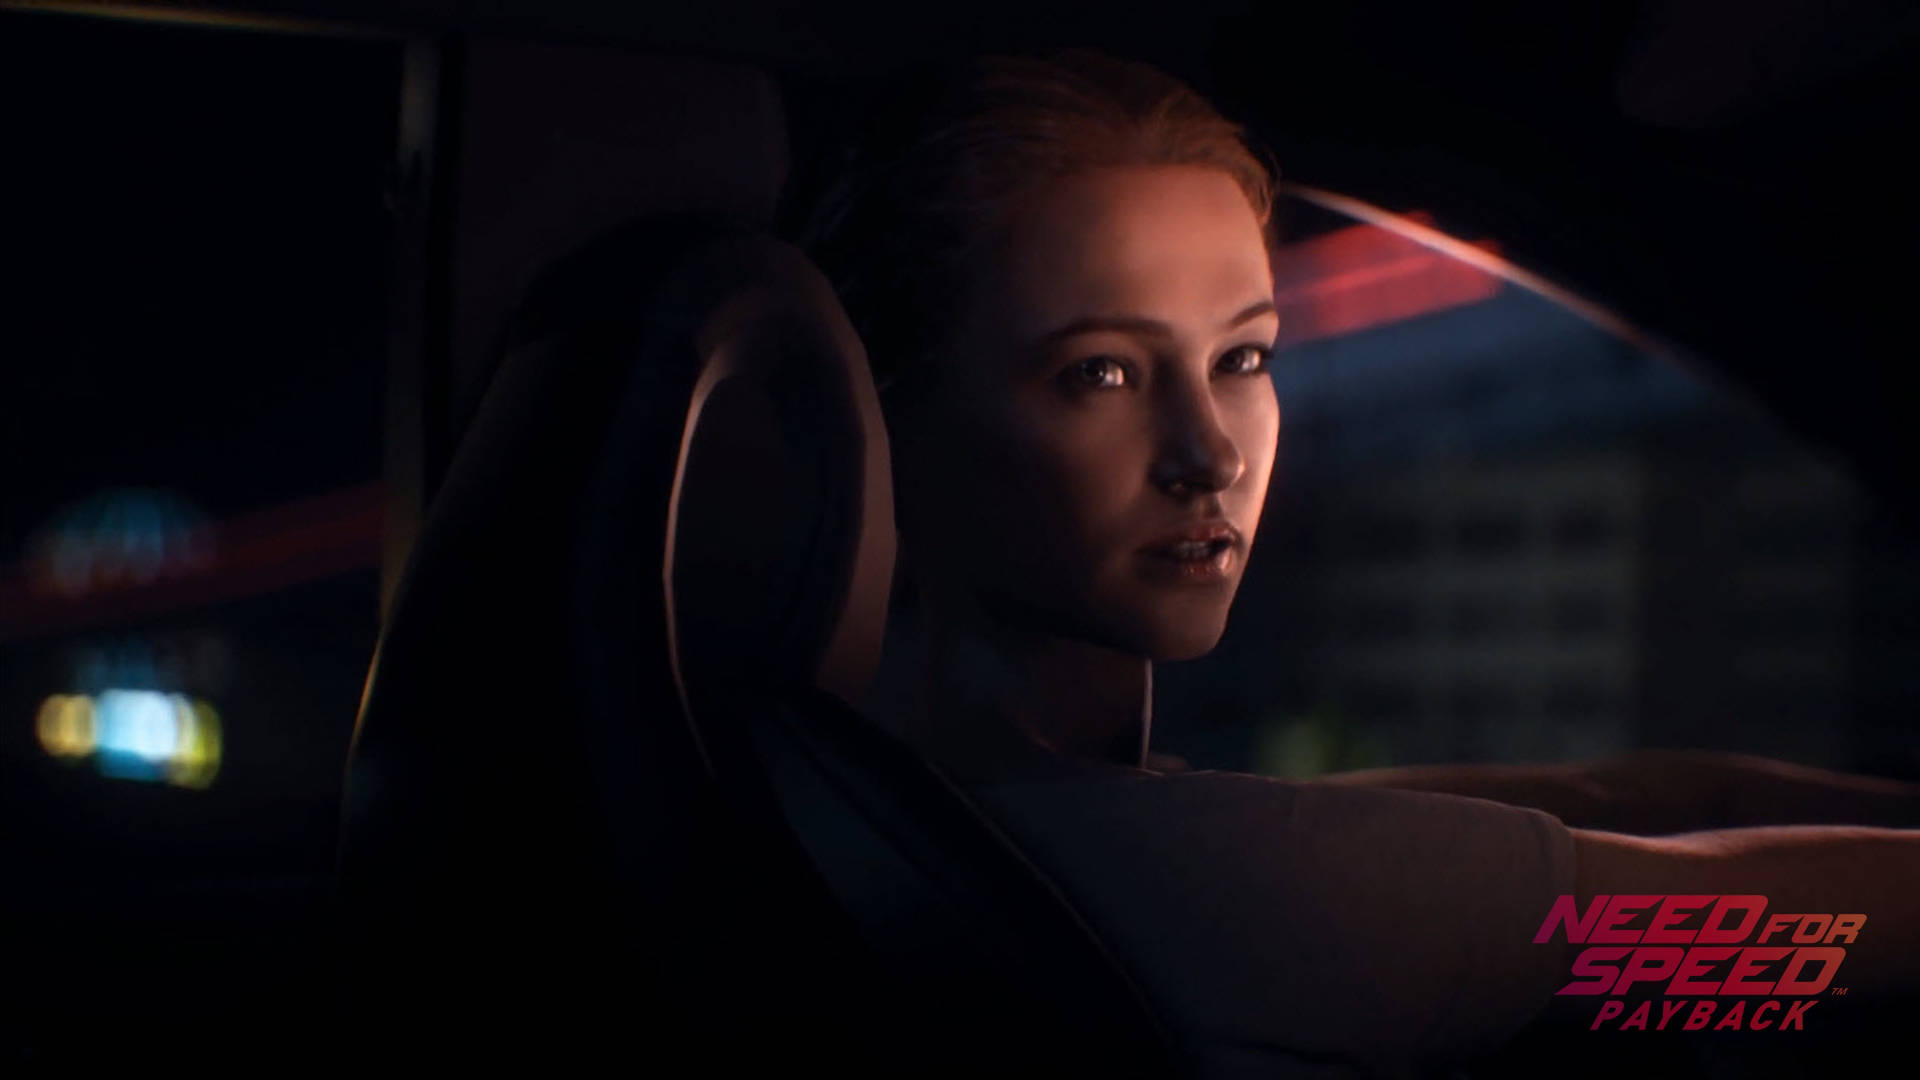 Need For Speed Payback Jessica Miller